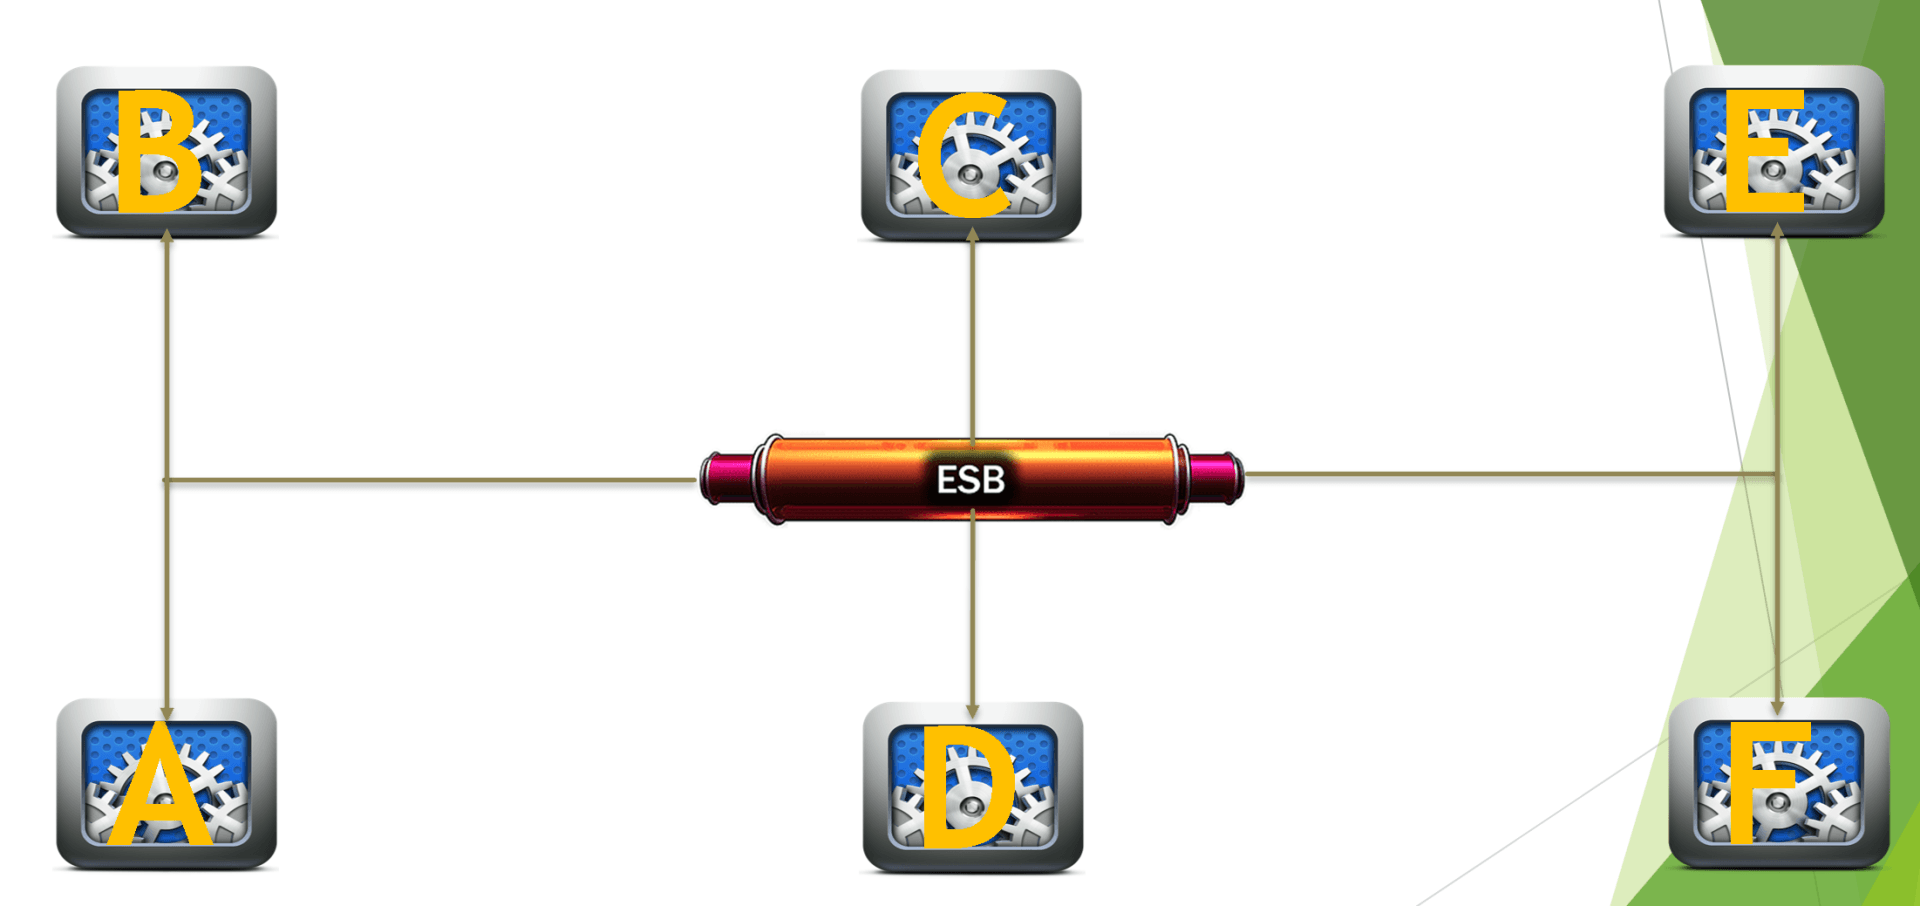 A diagram of a network with a purple item in the middle.